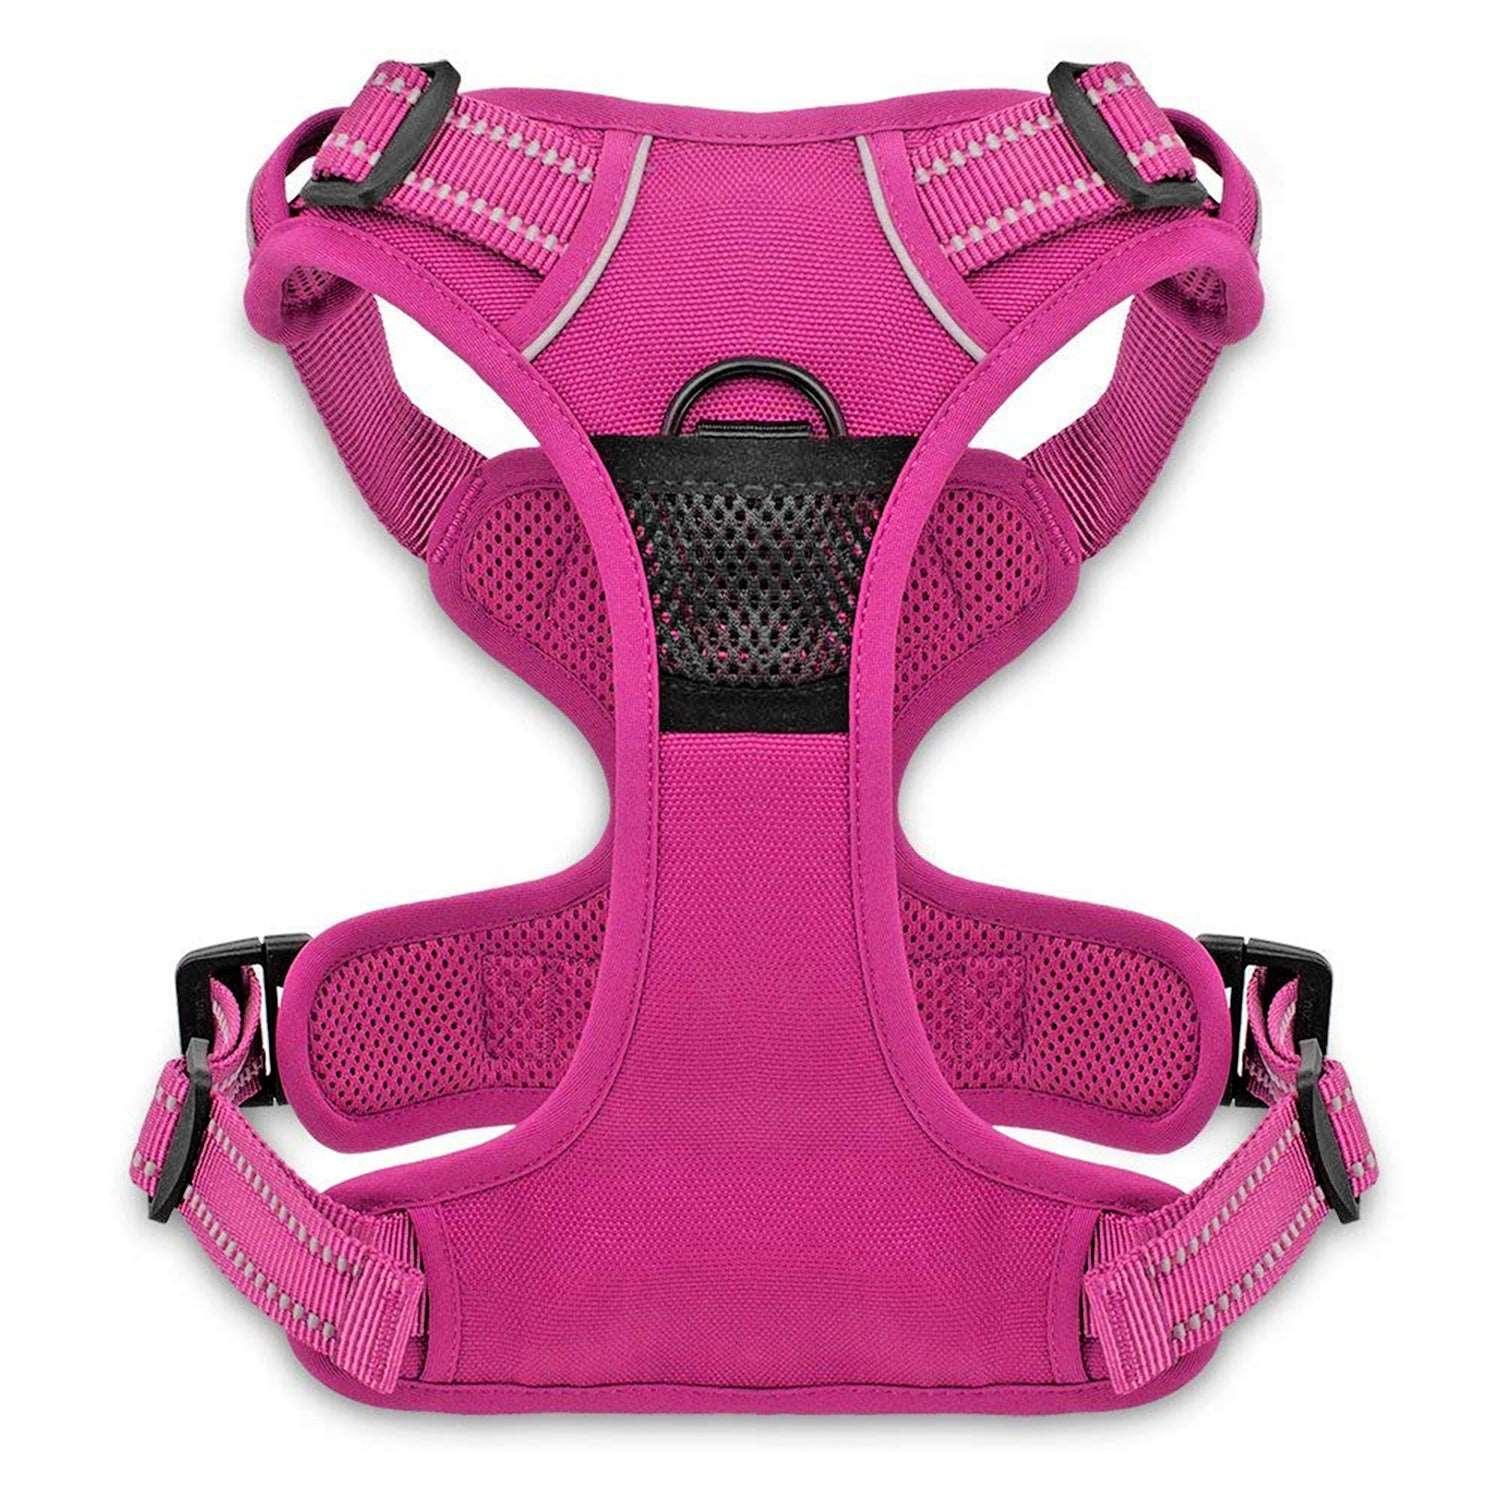 VOYAGER Dual-Attachment Dog Harness in fuchsia - back